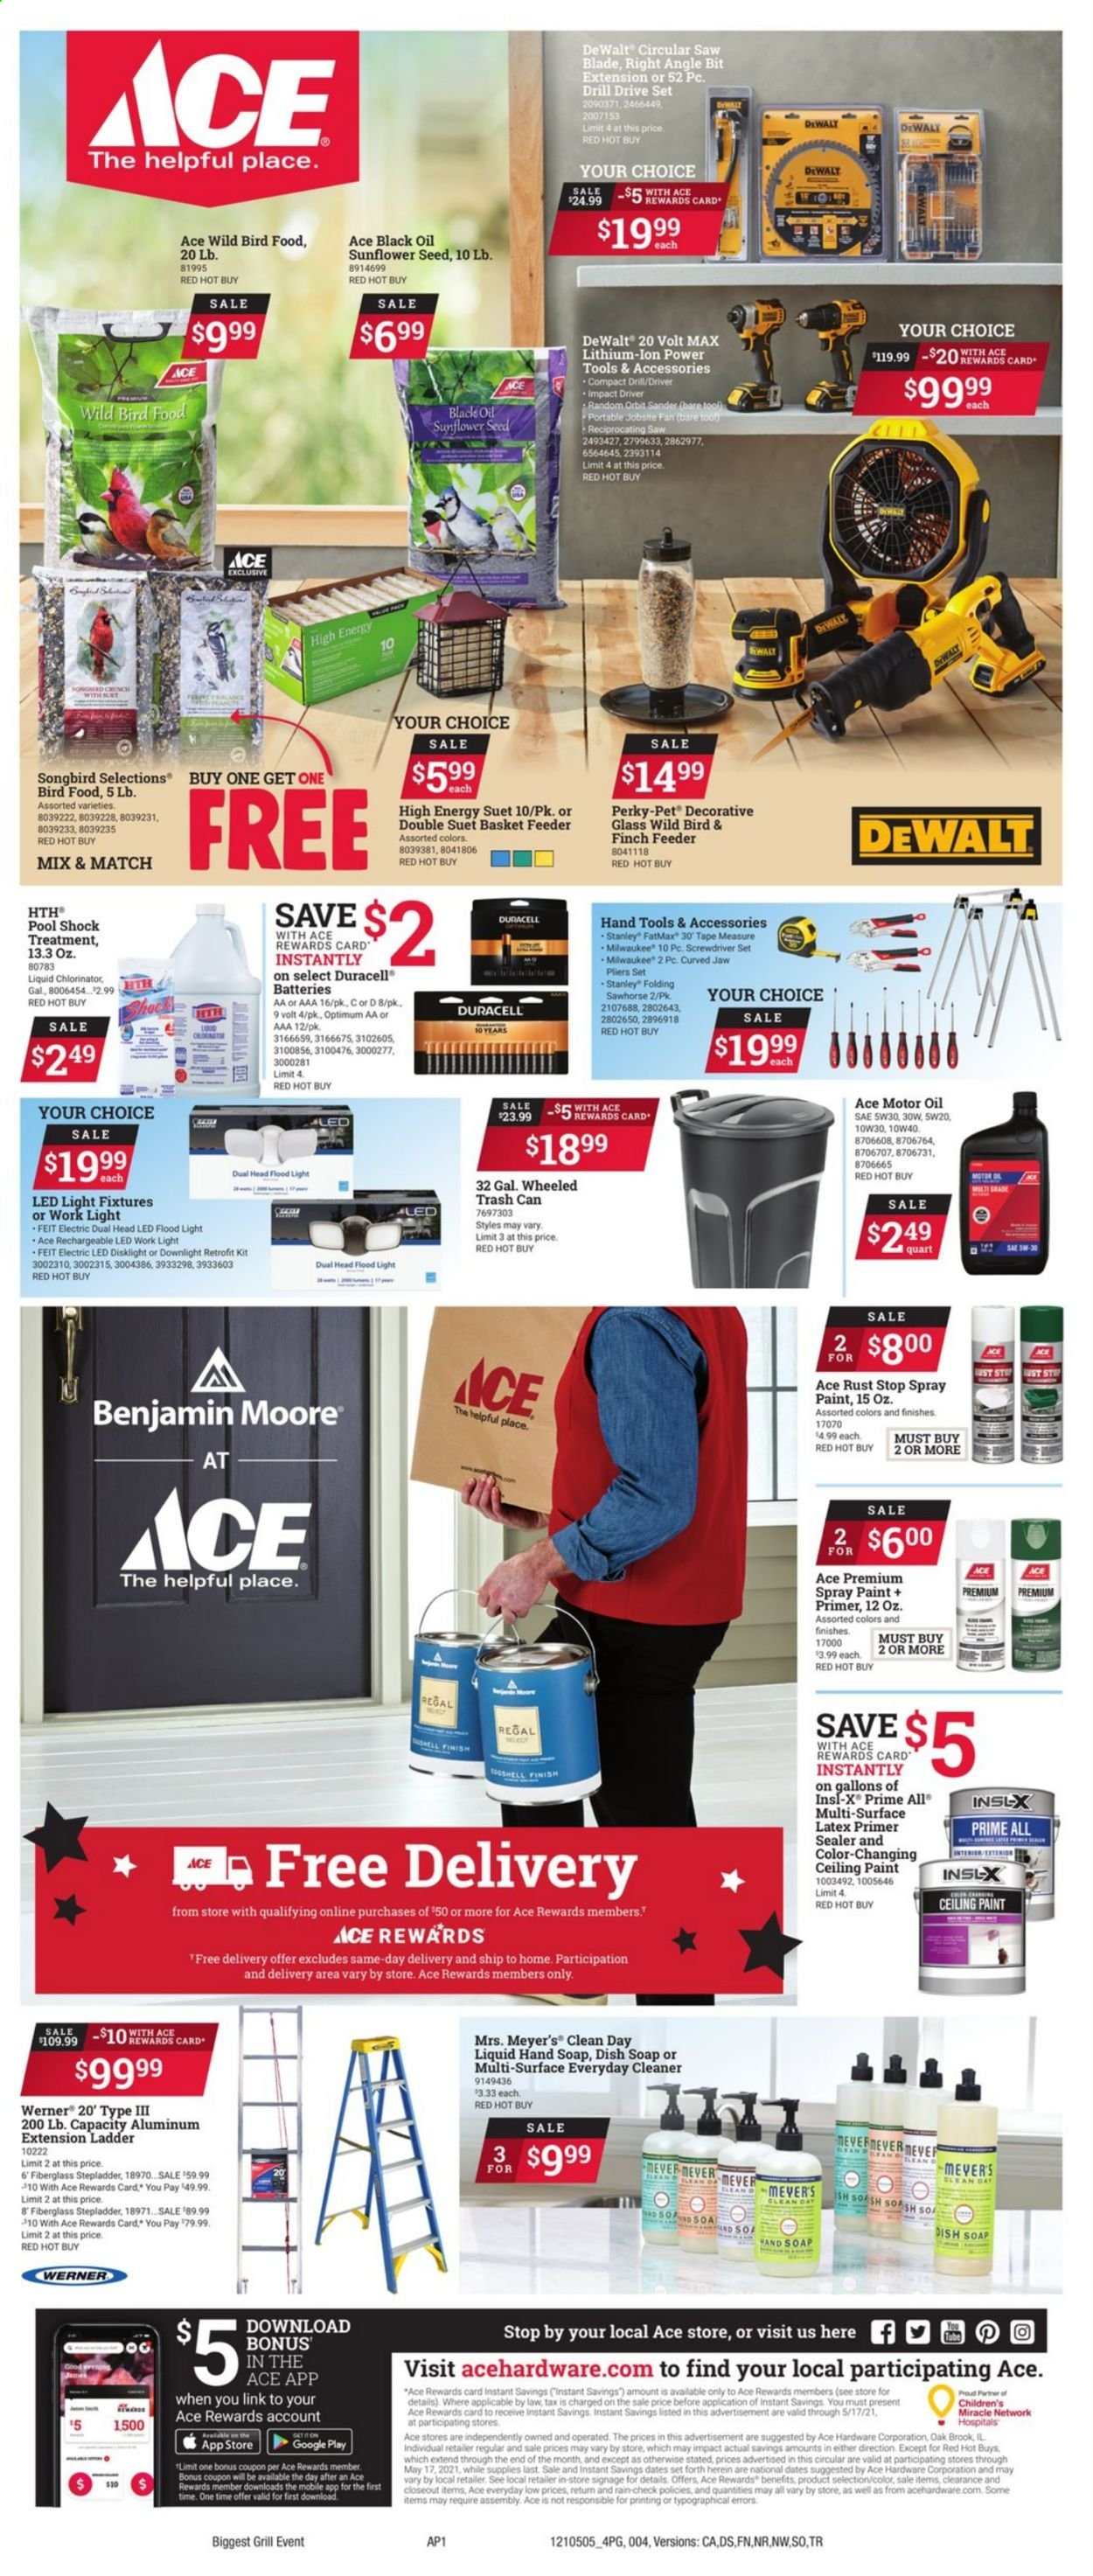 thumbnail - ACE Hardware Flyer - 05/05/2021 - 05/17/2021 - Sales products - tools & accessories, Orbit, cleaner, trash can, battery, Duracell, suet basket feeder, animal food, bird food, Optimum, feeder, ladder, stepladder, spray paint, Benjamin Moore, LED light, Stanley, work light, floodlight, Milwaukee, DeWALT, drill, impact driver, power tools, circular saw blade, random orbit sander, circular saw, saw, reciprocating saw, screwdriver, pliers, screwdriver set, hand tools, measuring tape, grill, pool, plant seeds, motor oil. Page 4.